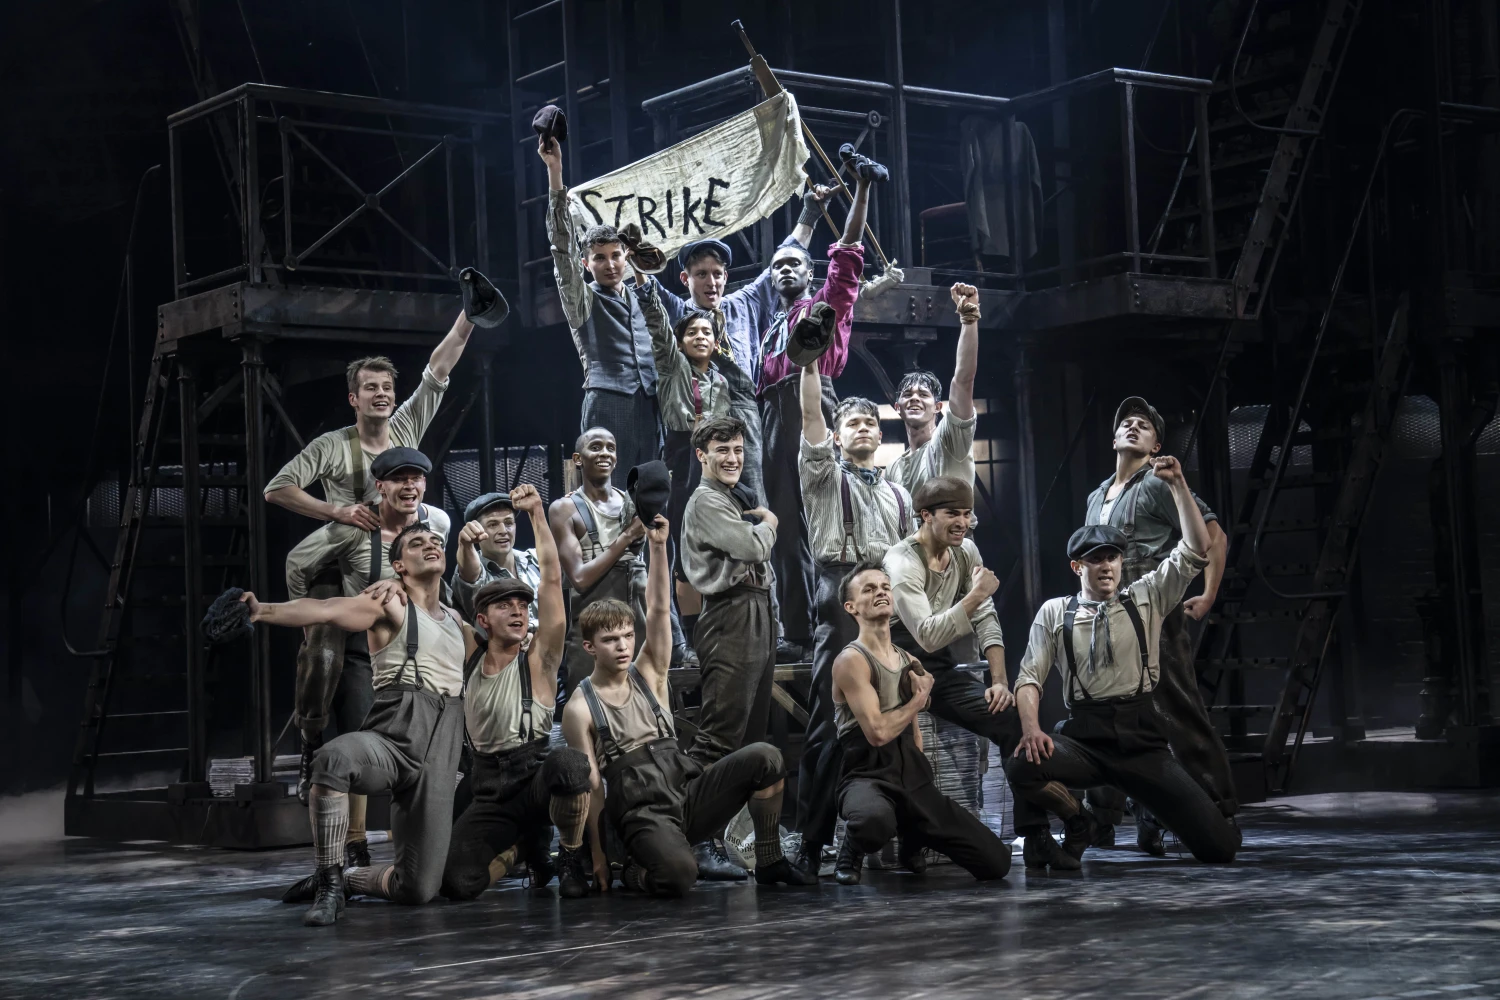 Newsies: What to expect - 1